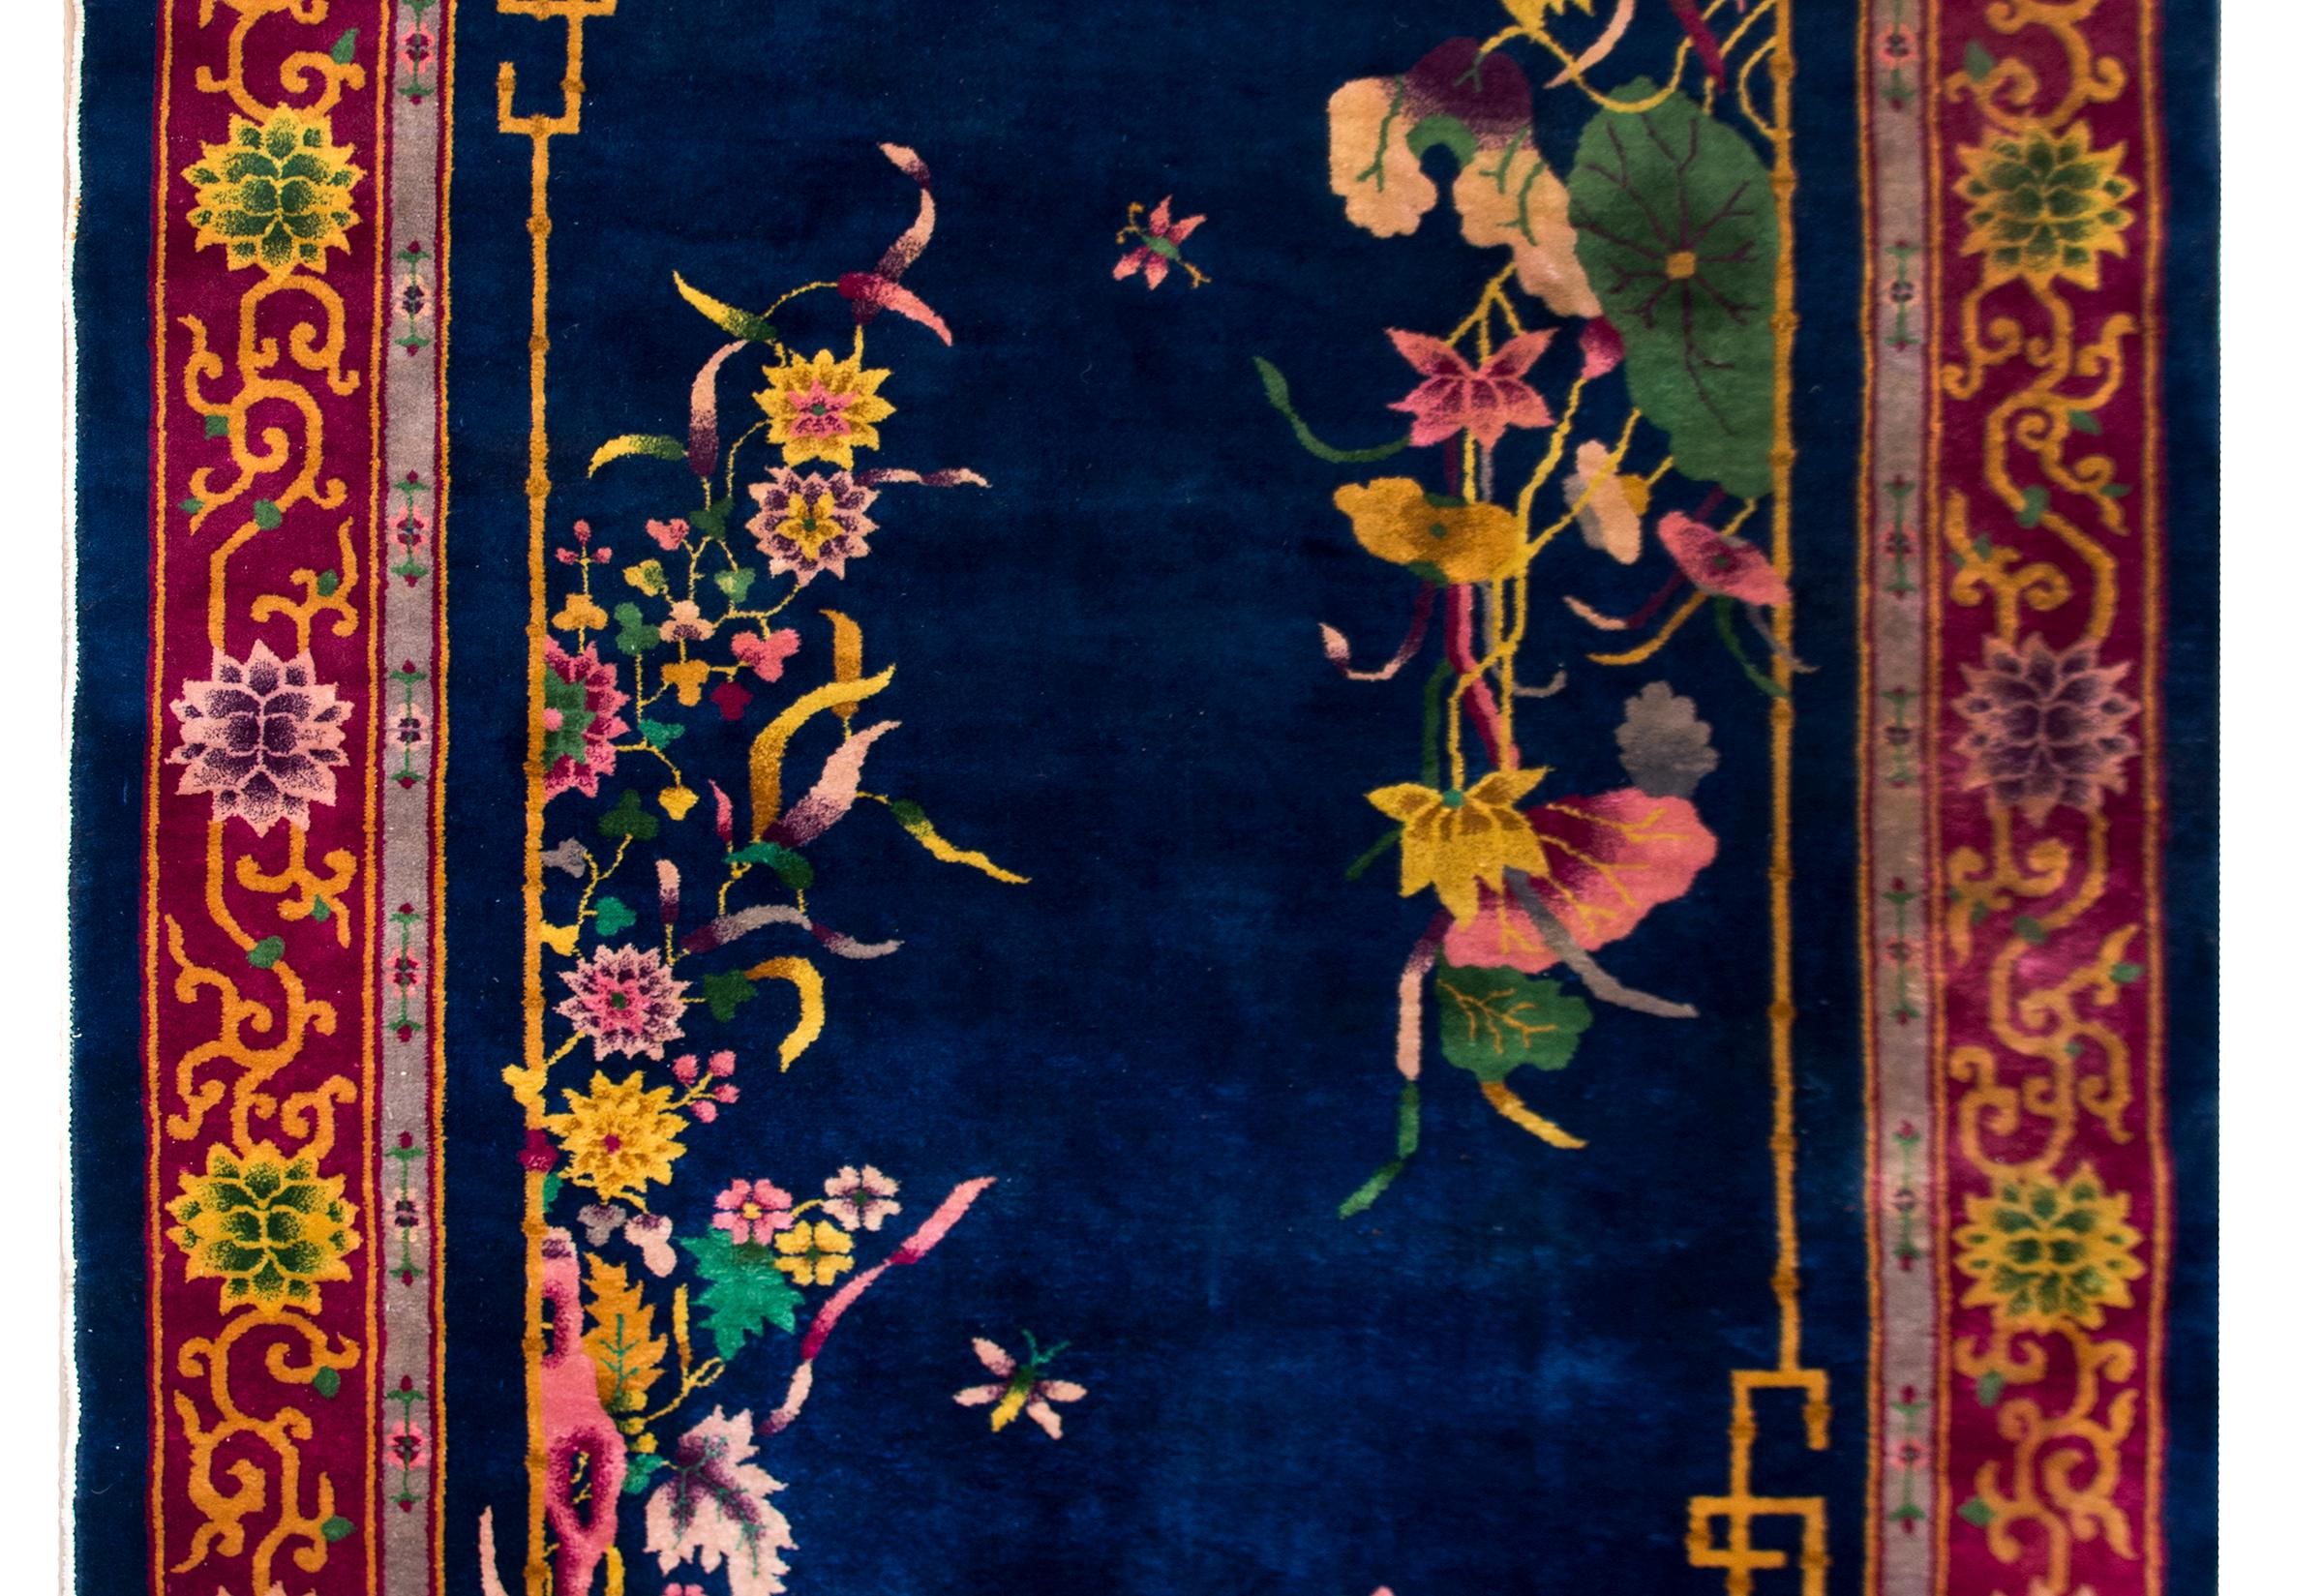 A beautiful early 20th century Chinese Art Deco rug with deep indigo background covered in multi-colored chrysanthemum, peonies, prunus, and lotus blossoms, and surrounded by a wide border with large chrysanthemums and scrolling vines.